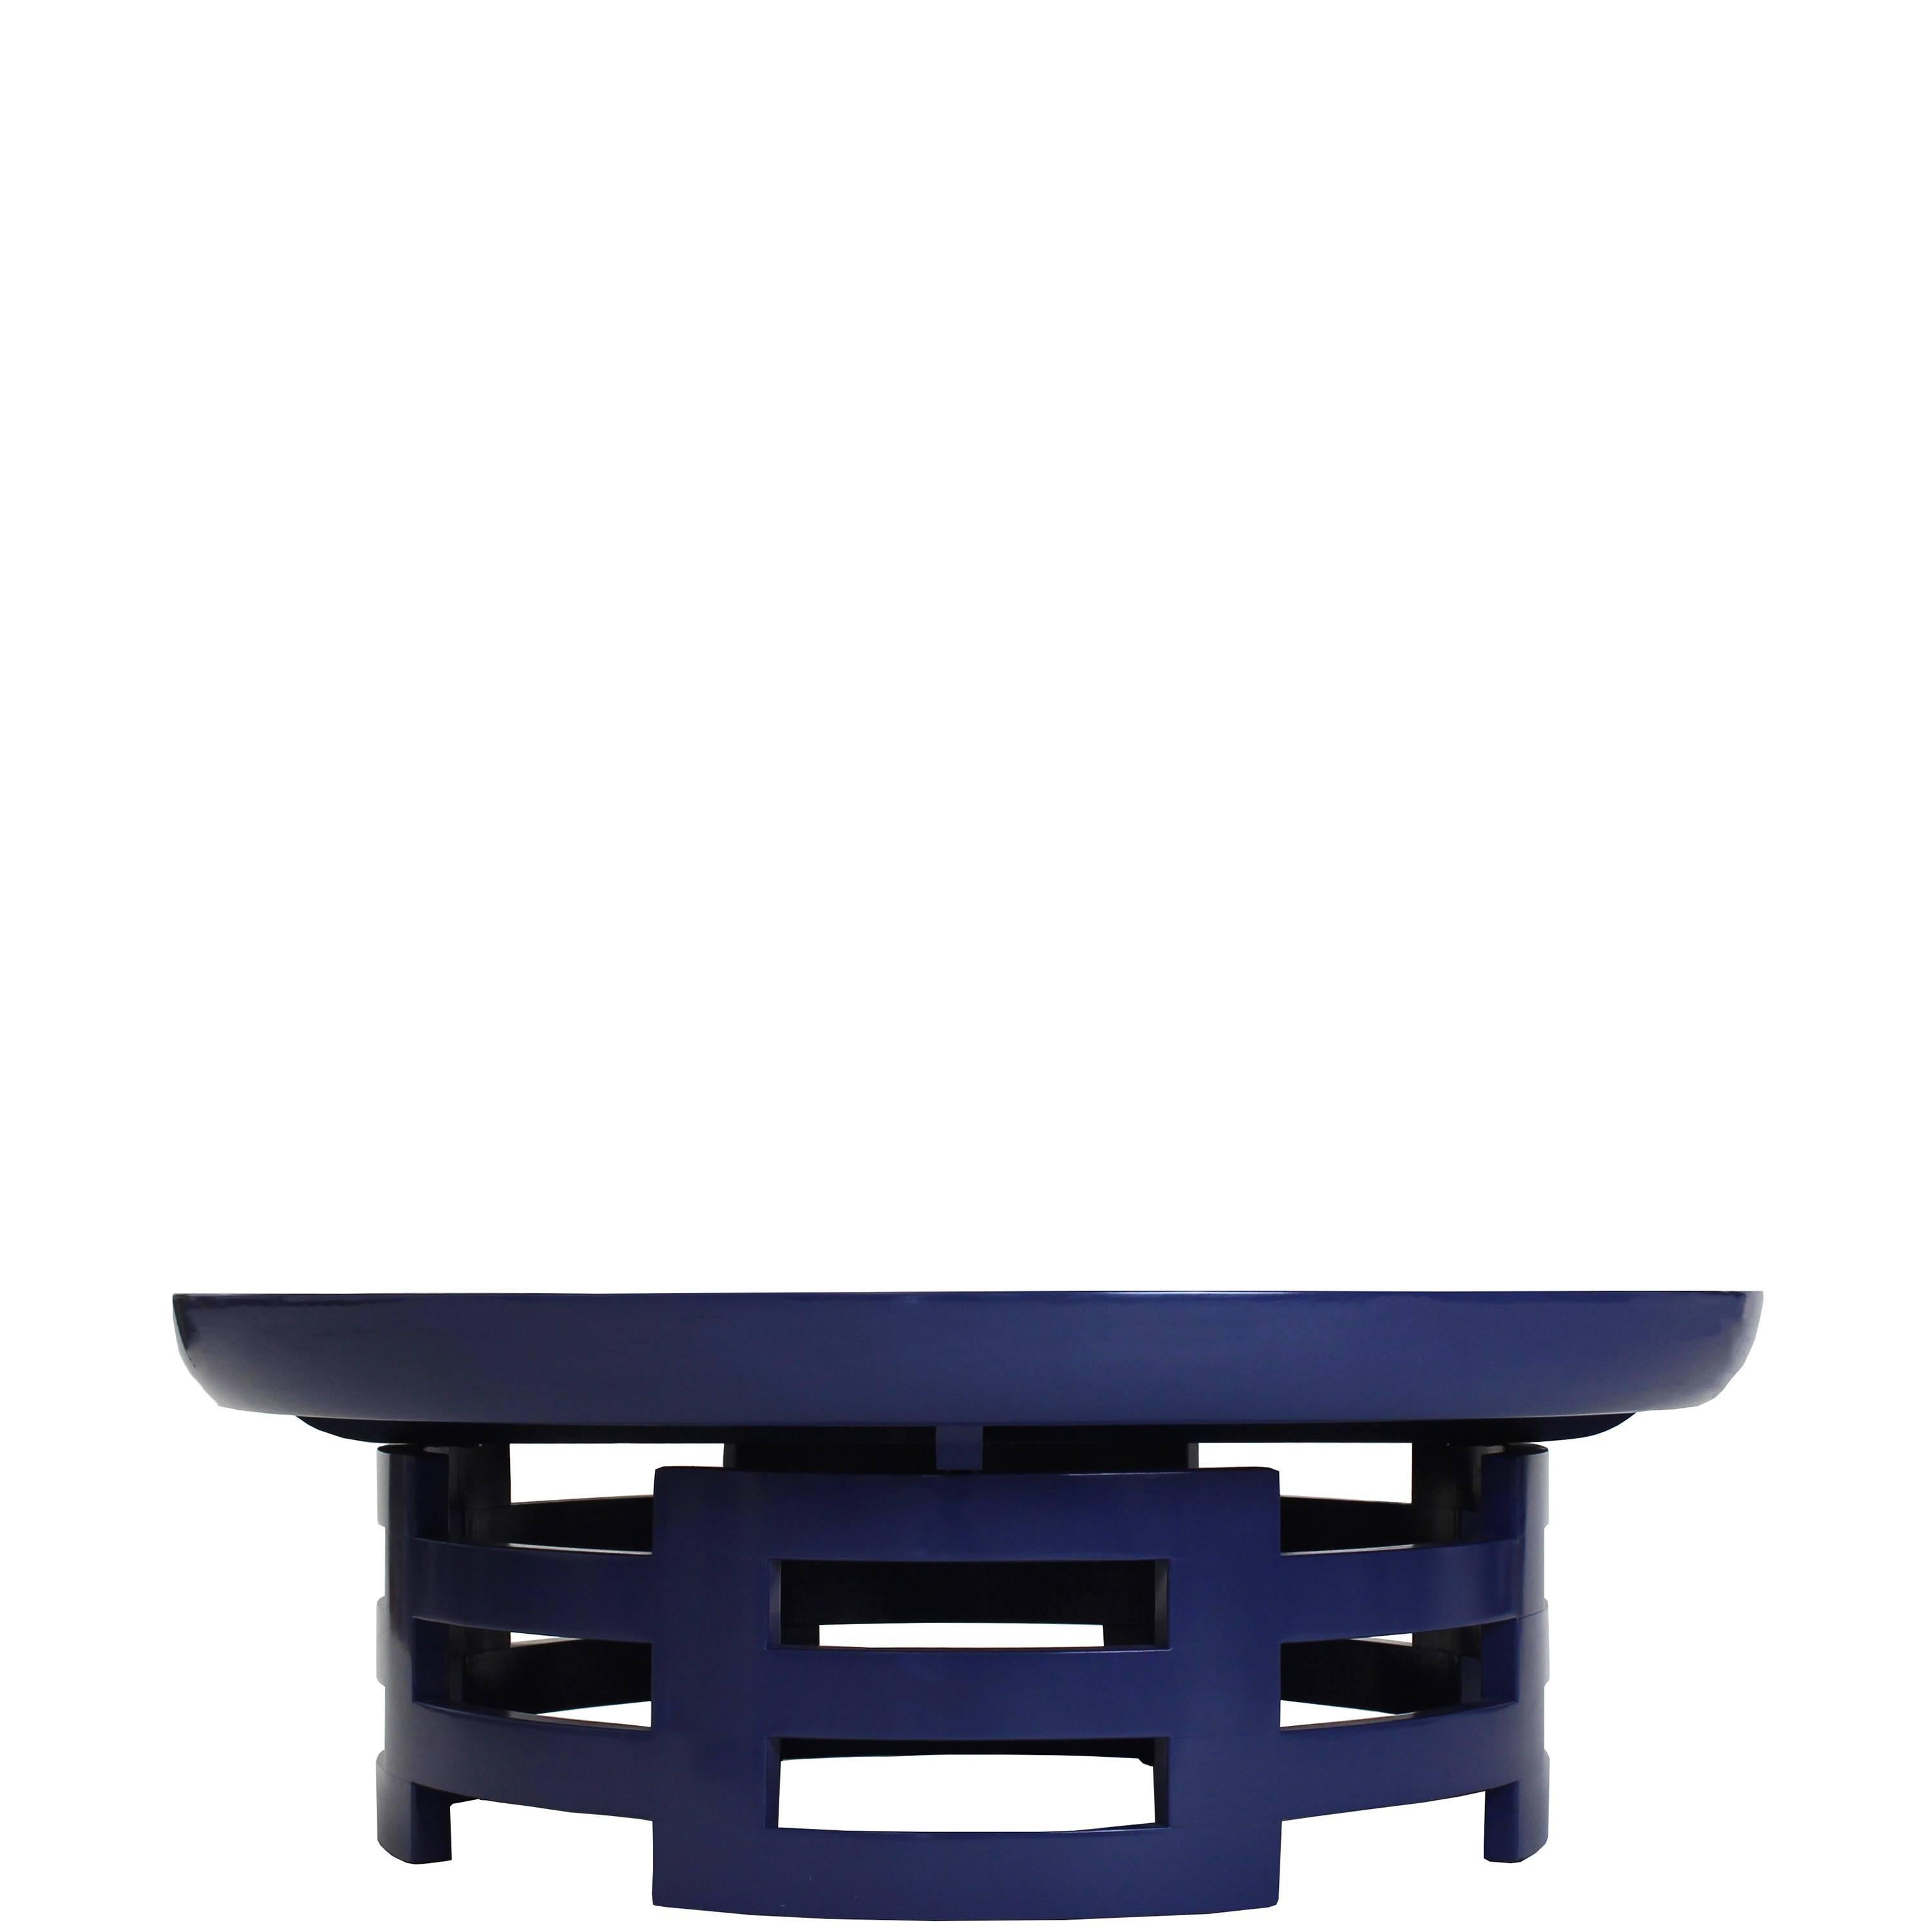 Kittinger Asian style low coffee table. Newly lacquered in navy.

Measurements: 14.5" H x 42" diameter.